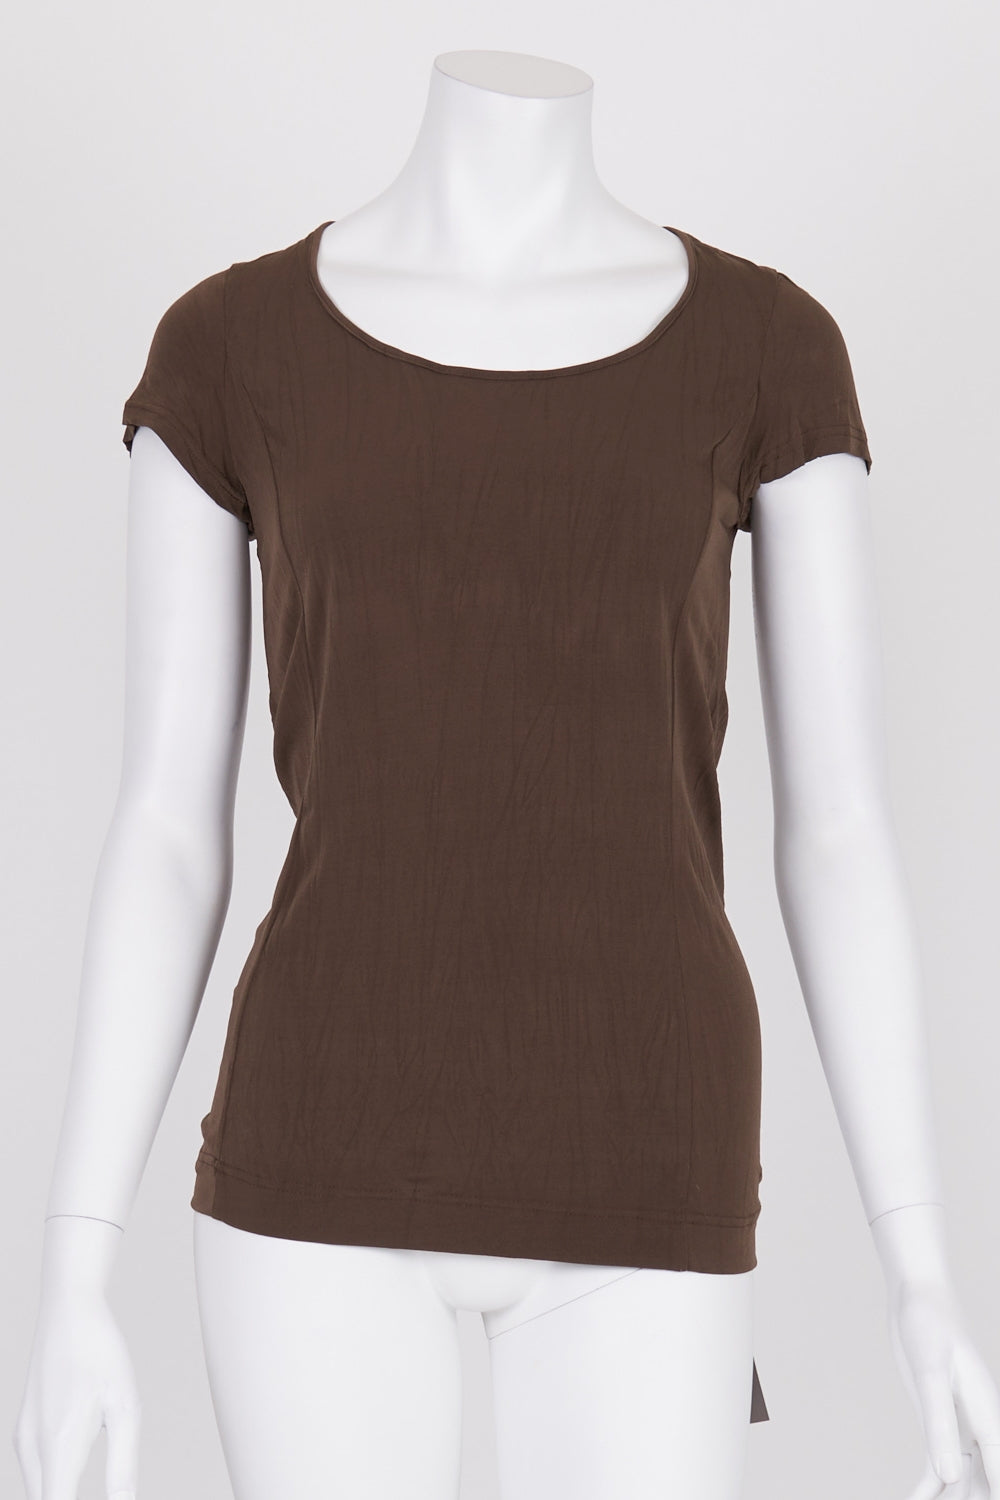 Body Layer Brown Short Sleeve Top 8